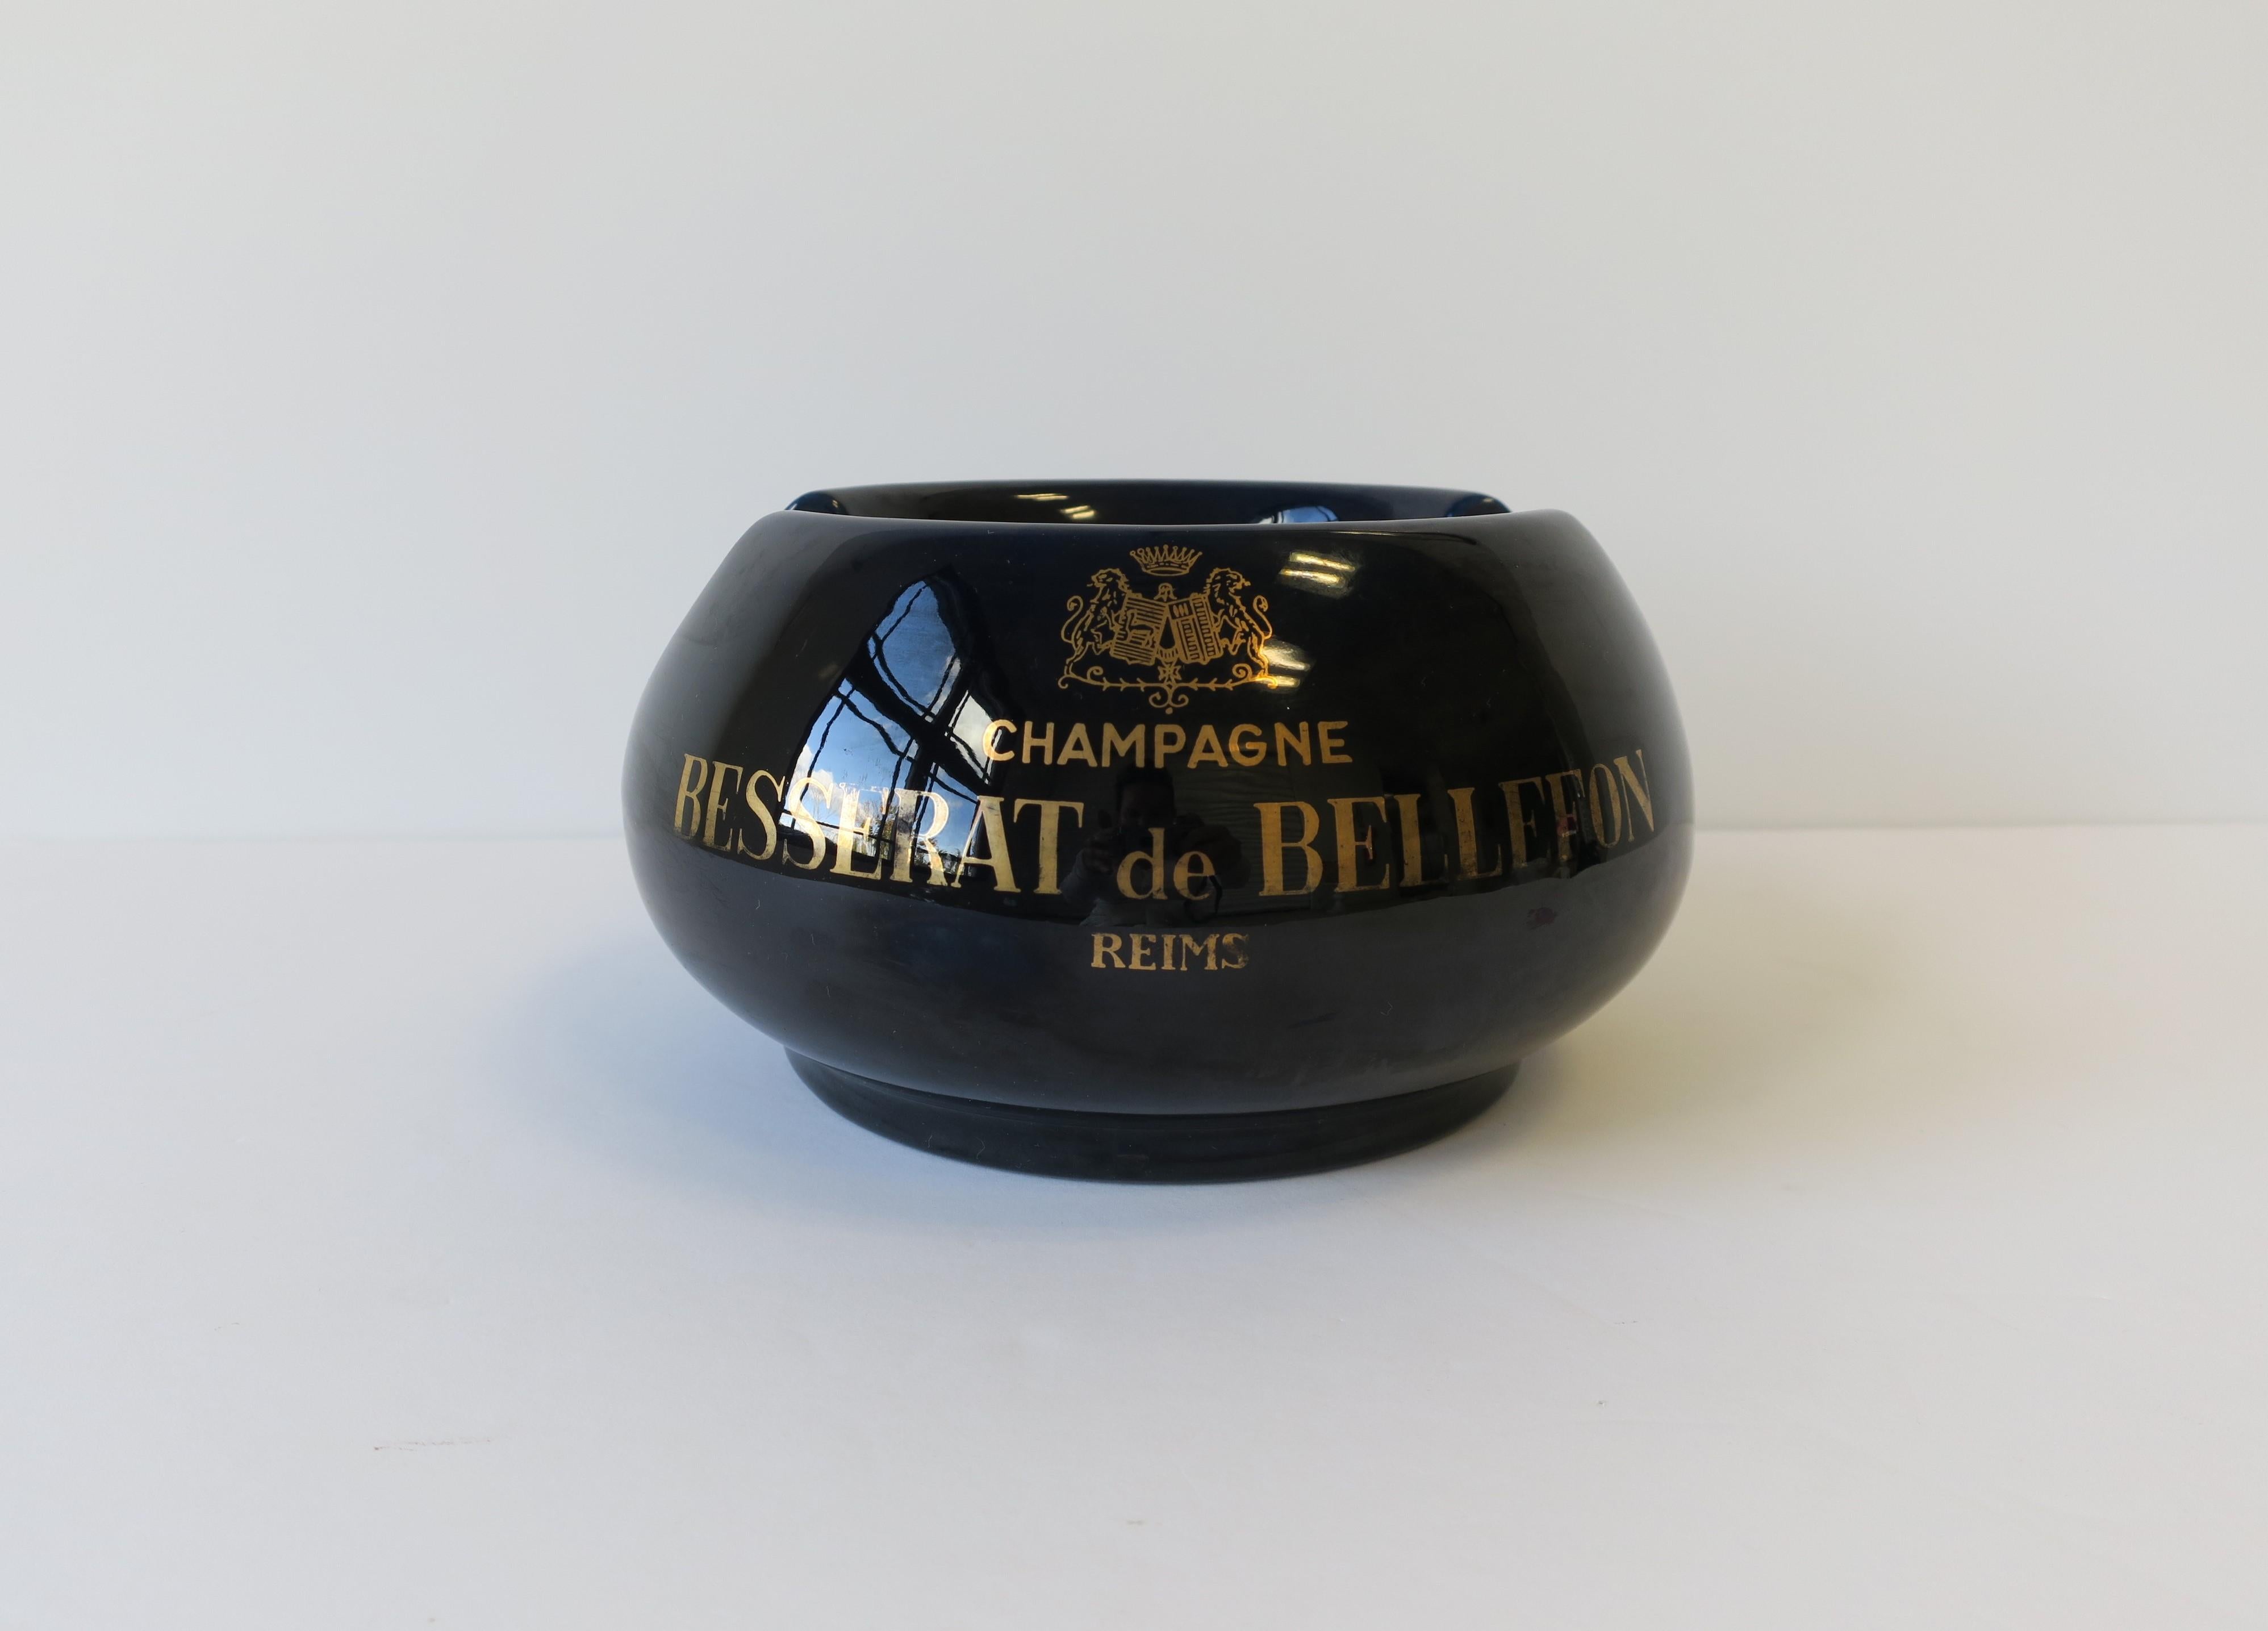 A great, relatively large, dark blue and gold ceramic cigar ashtray made for French Champagne house 'Besserat de Bellefon', made in France, circa 20th century. Piece reads, on both sides: 'Champagne', 'Besserat de Bellefon', 'Reims'. Marked on